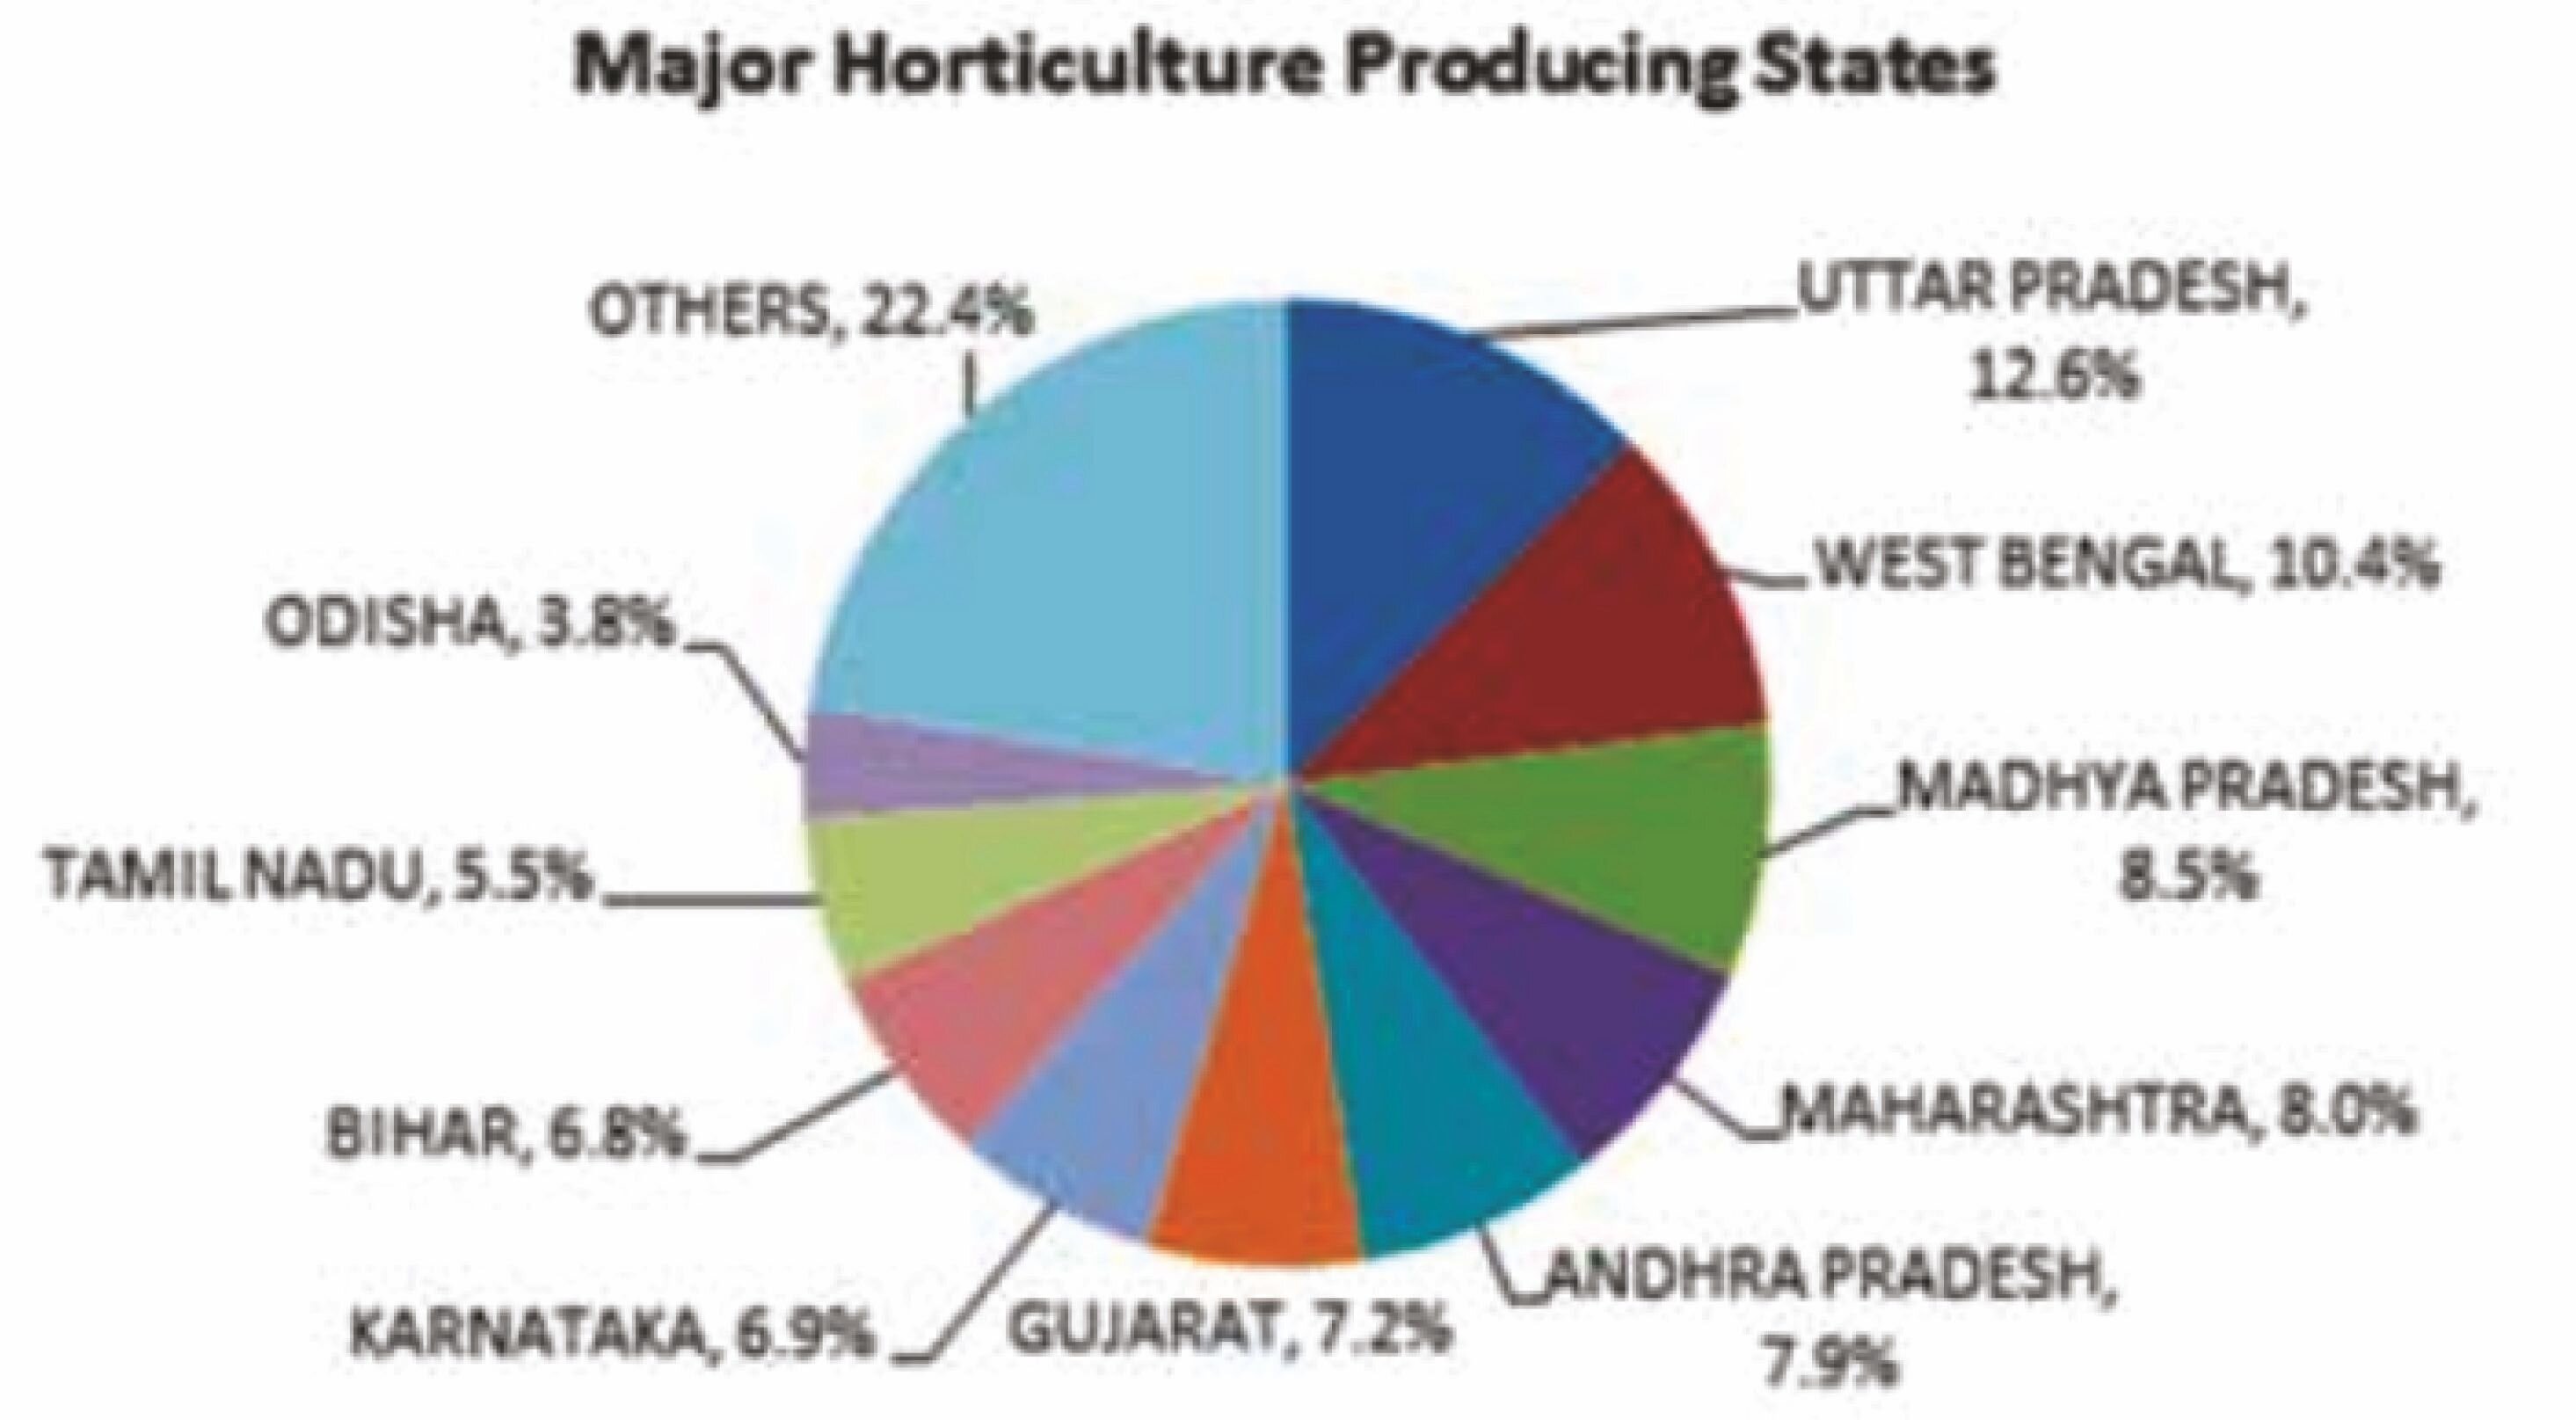 Horticulture Sector in India | 23 Sep 2019